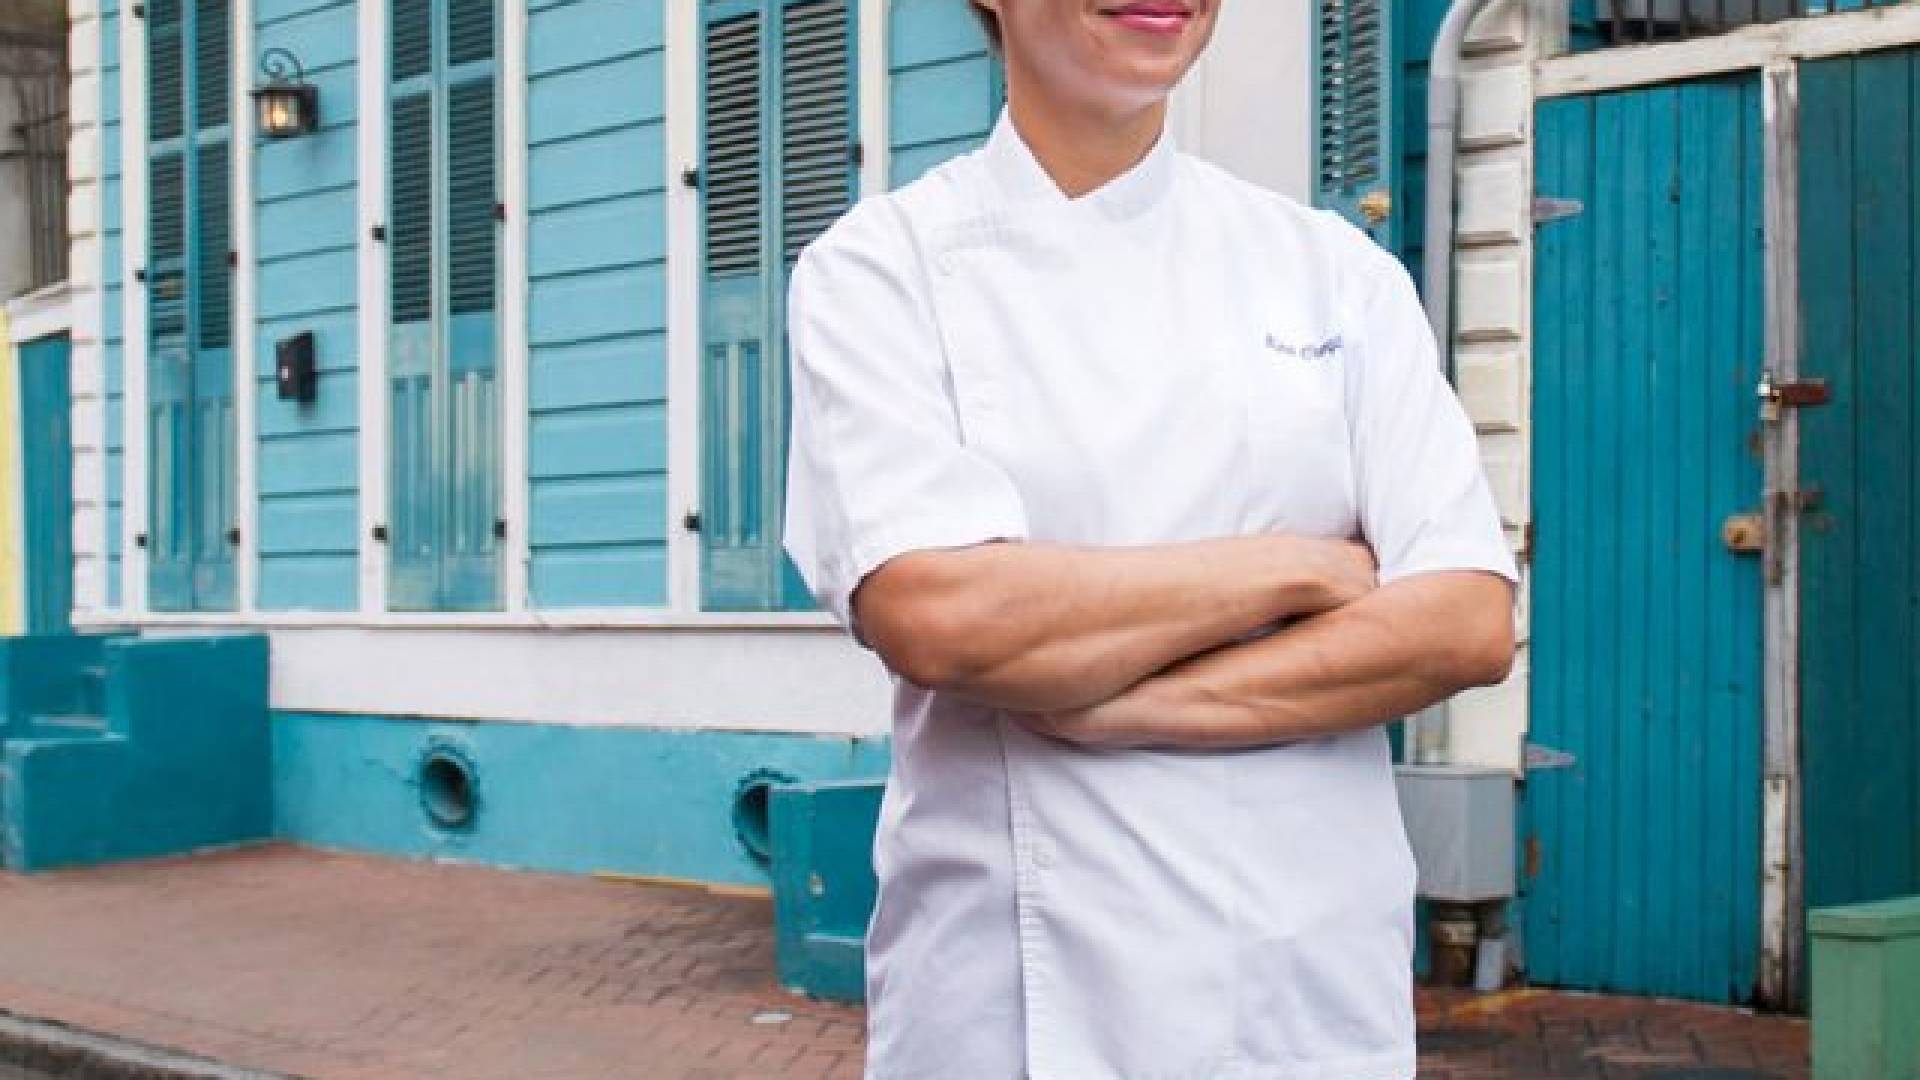 woman with arms crossed stands in street wearing chef's coat